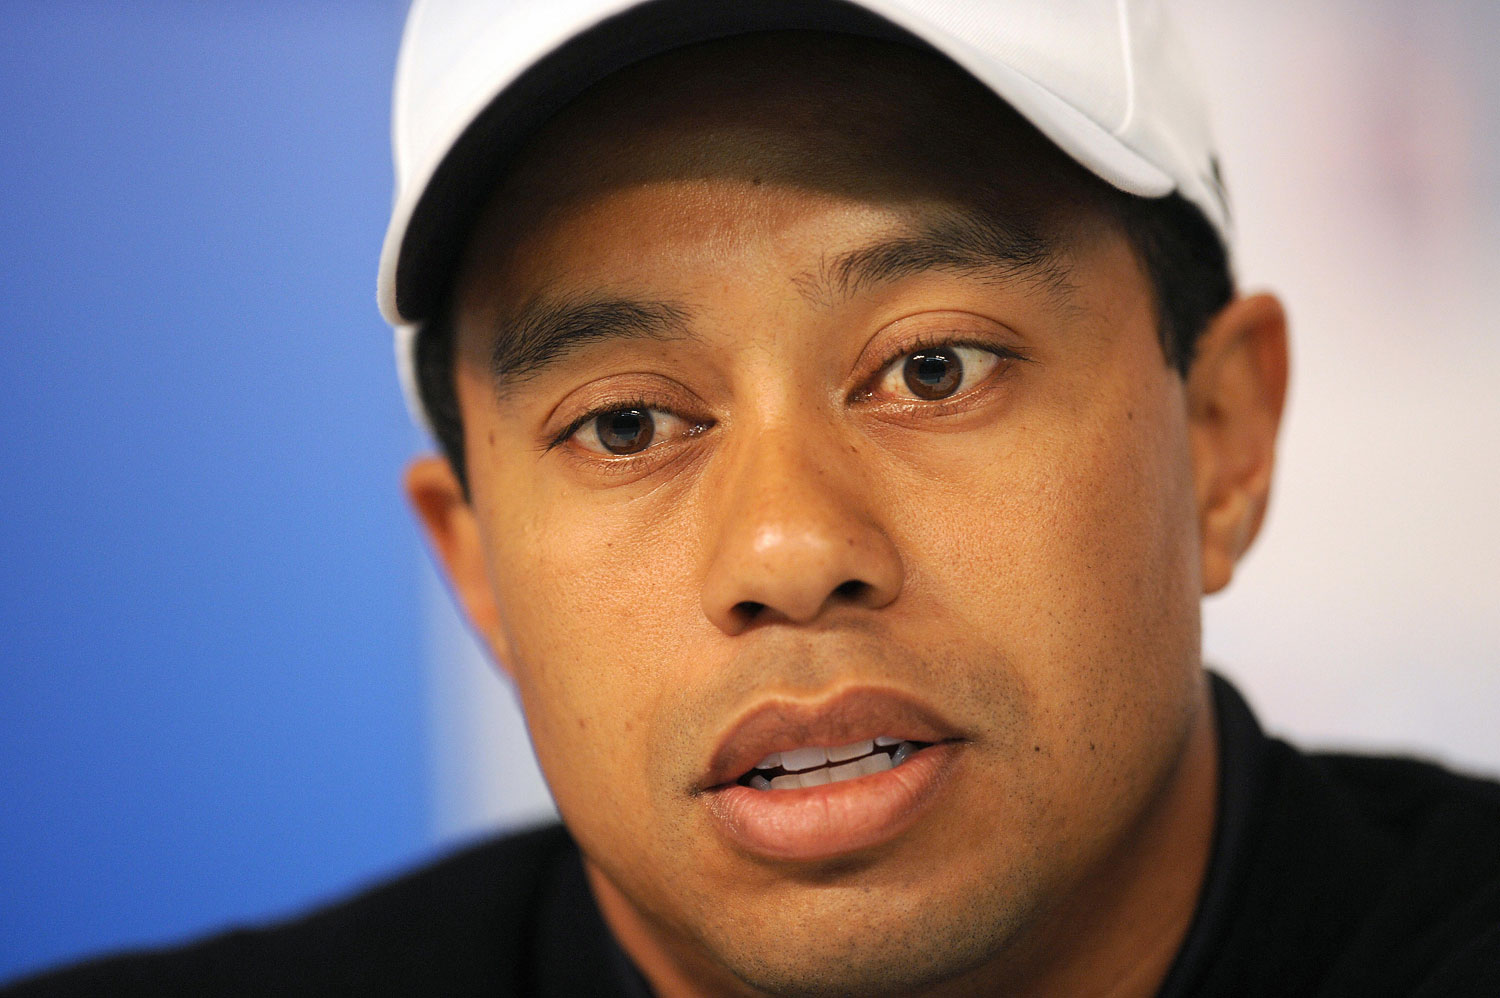 World number one golf player Tiger Woods speaks at a press conference at the Chevron World Challenge, at the Sherwood Country Cub in Thousand Oaks, Calif. on Dec. 17, 2008.